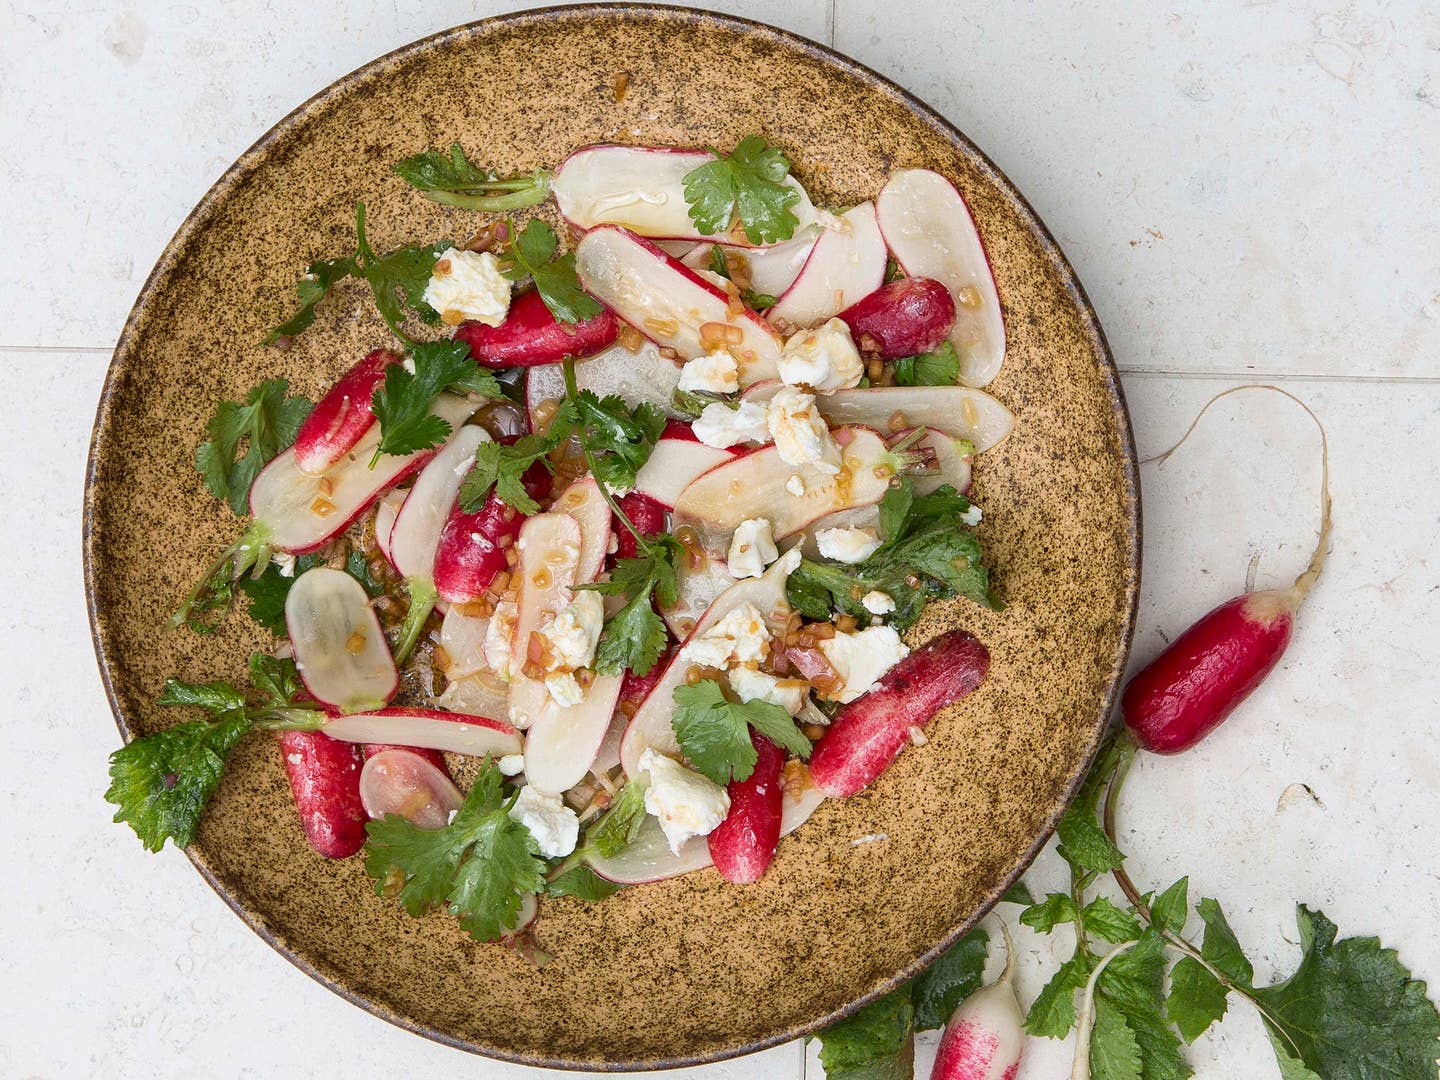 Fall Produce Guide: Radishes